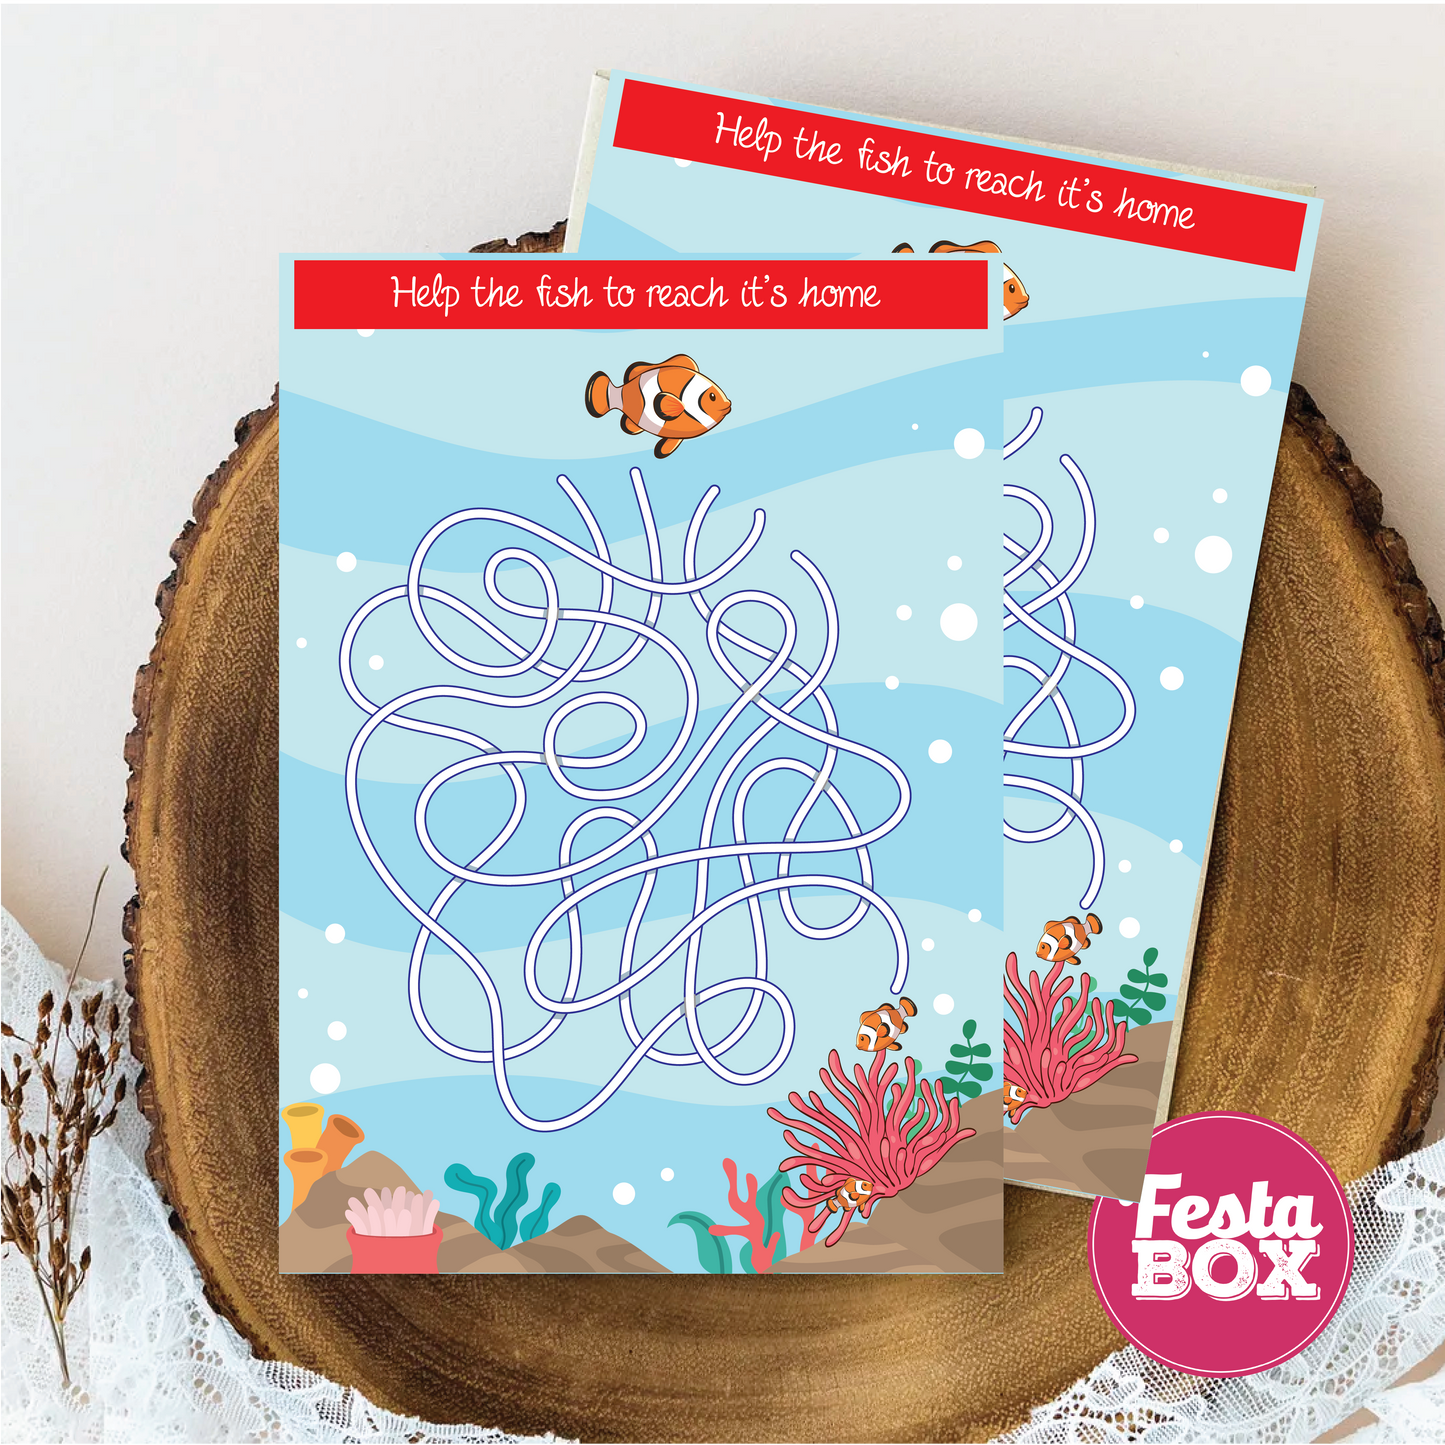 Birthday Party Game - Find the way - Under the Sea Theme